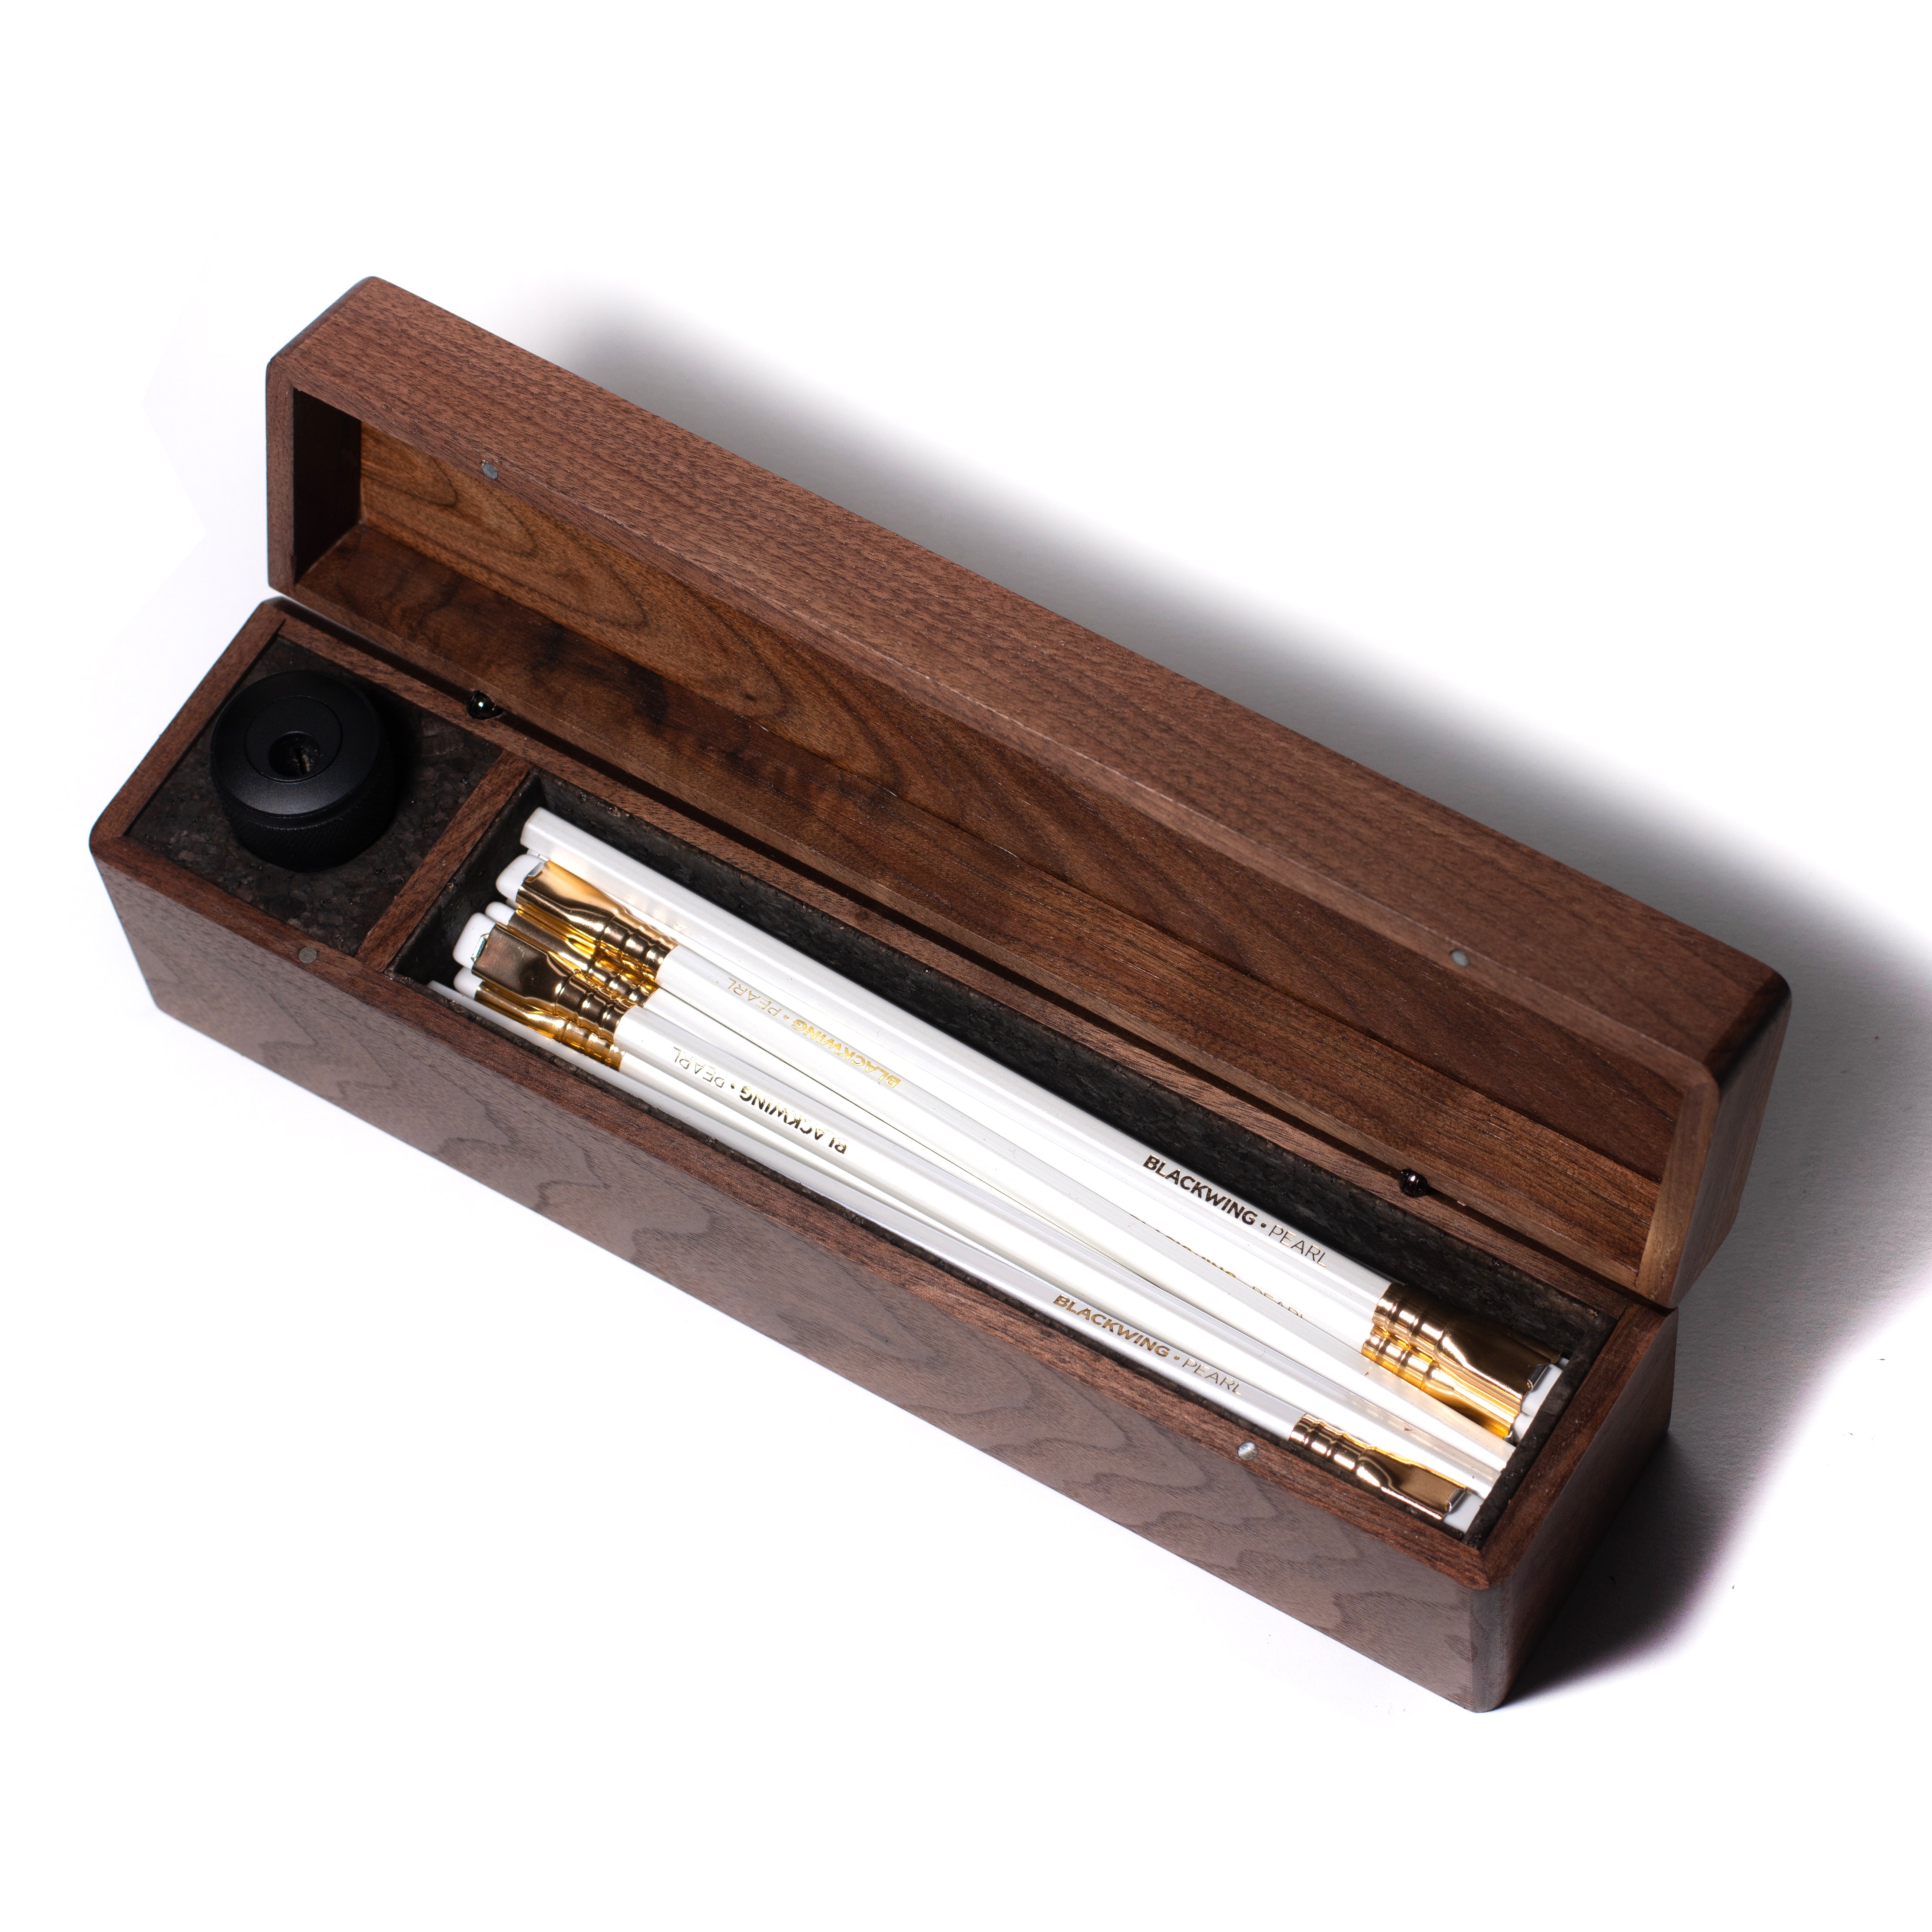 A Blackwing Walnut Box filled with Blackwing pencils and pens.